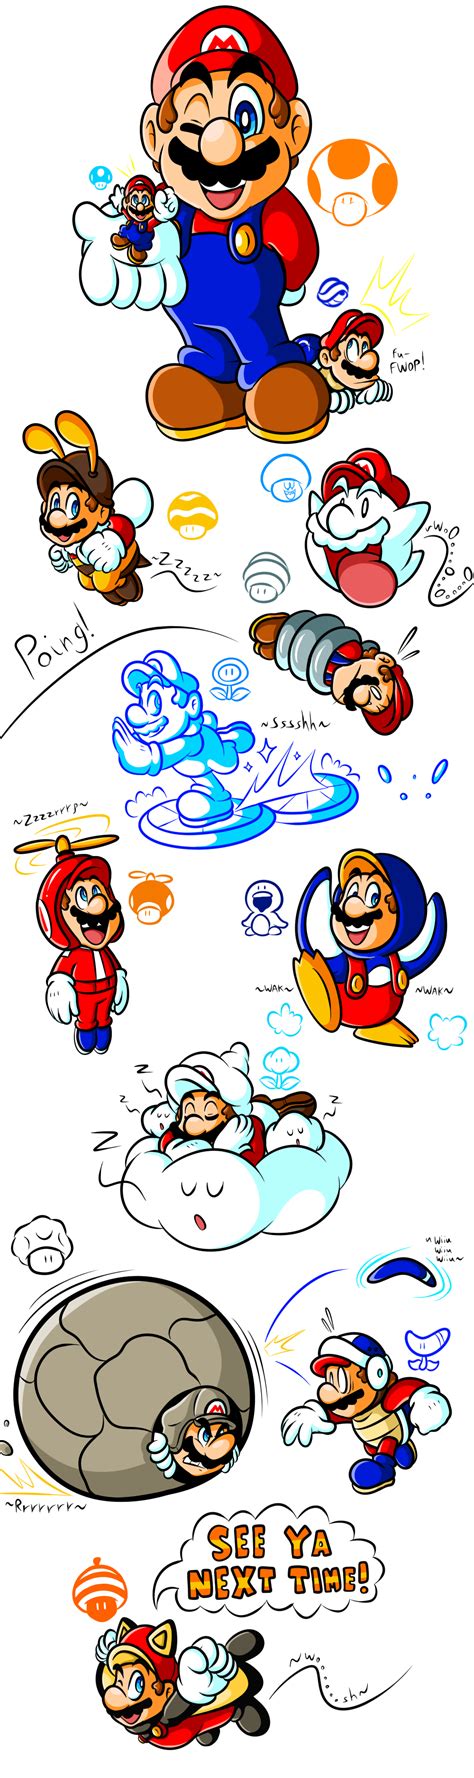 Mario S Gallery Of Power Ups 2006 2012 By JamesmanTheRegenold